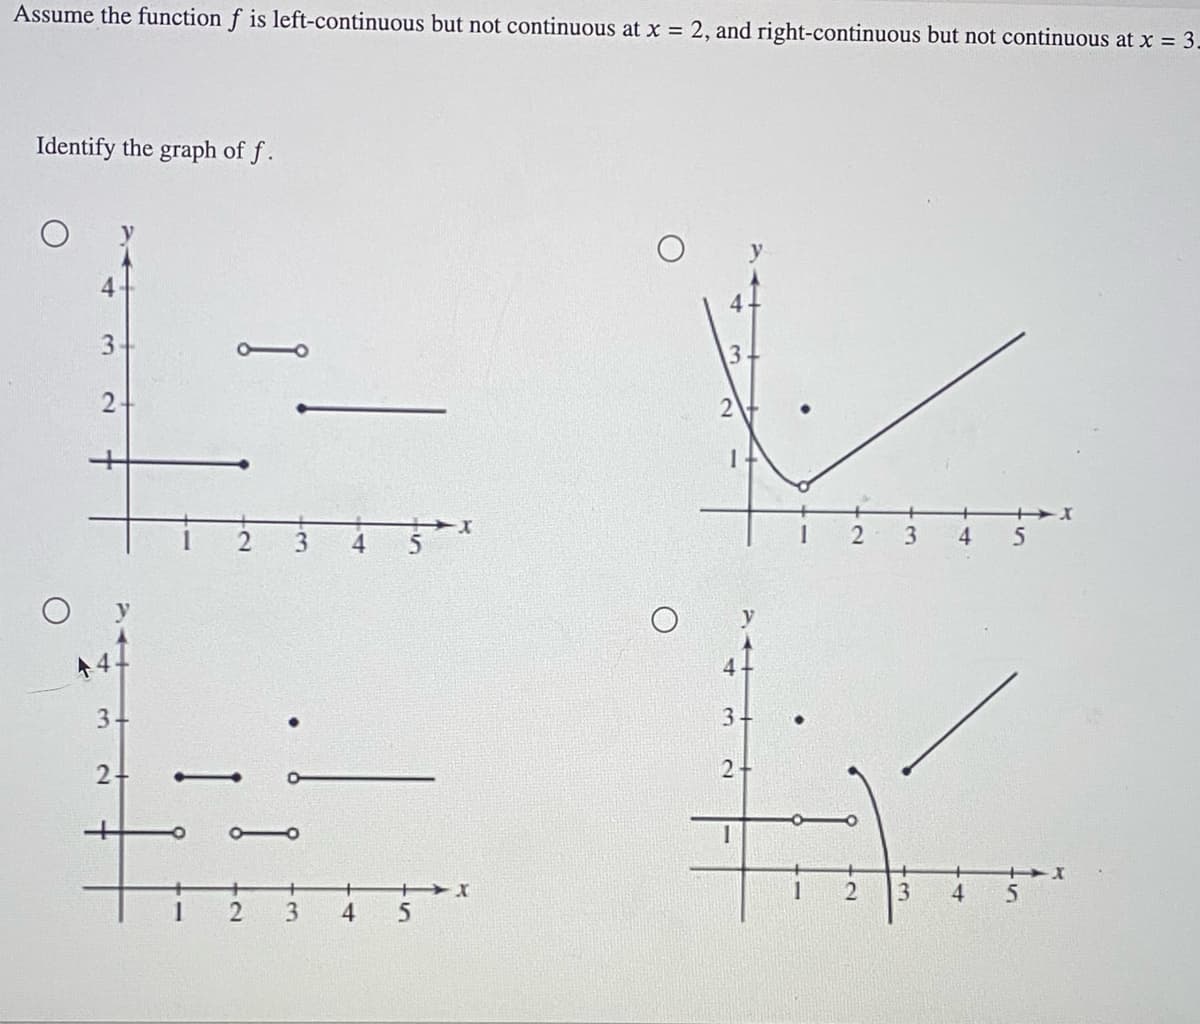 Assume the function f is left-continuous but not continuous at x = 2, and right-continuous but not continuous at x = 3.
Identify the graph of f.
3
2
3-
2+
1
1
2
3
4
4
5
5
X
3
2
2
2
3 4 5
3
4
-X
5